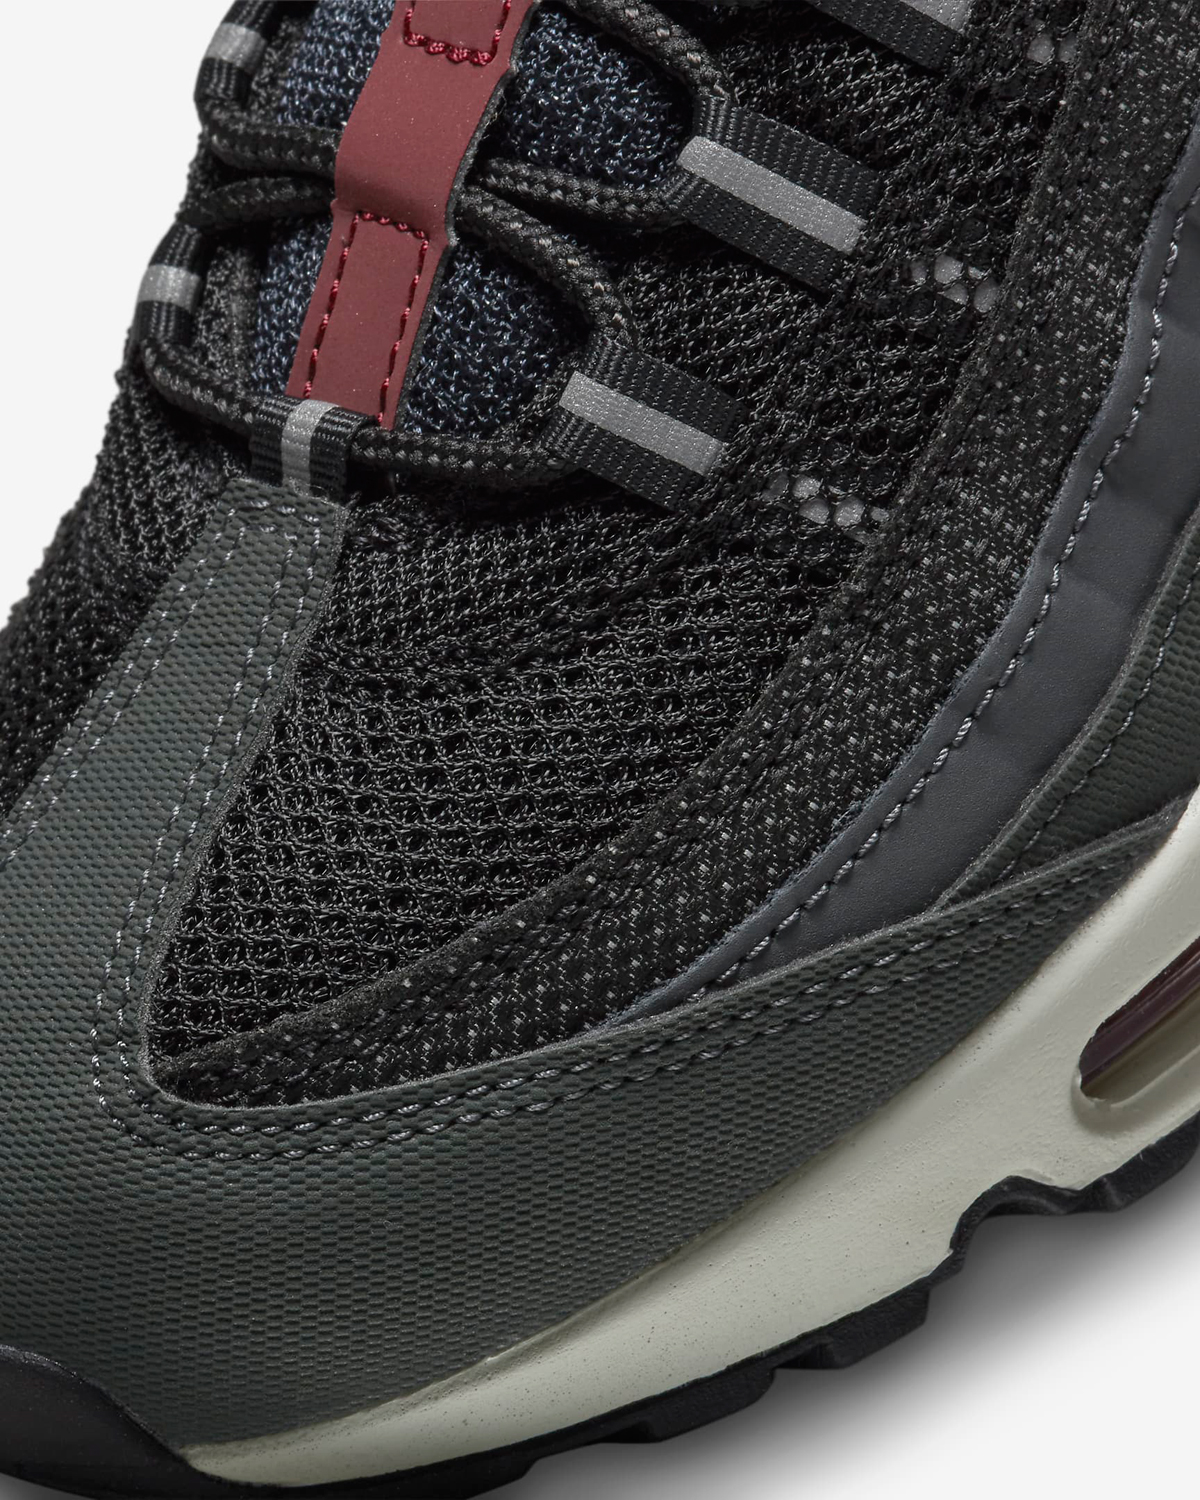 nike-air-max-95-anthracite-team-red-black-release-date-7